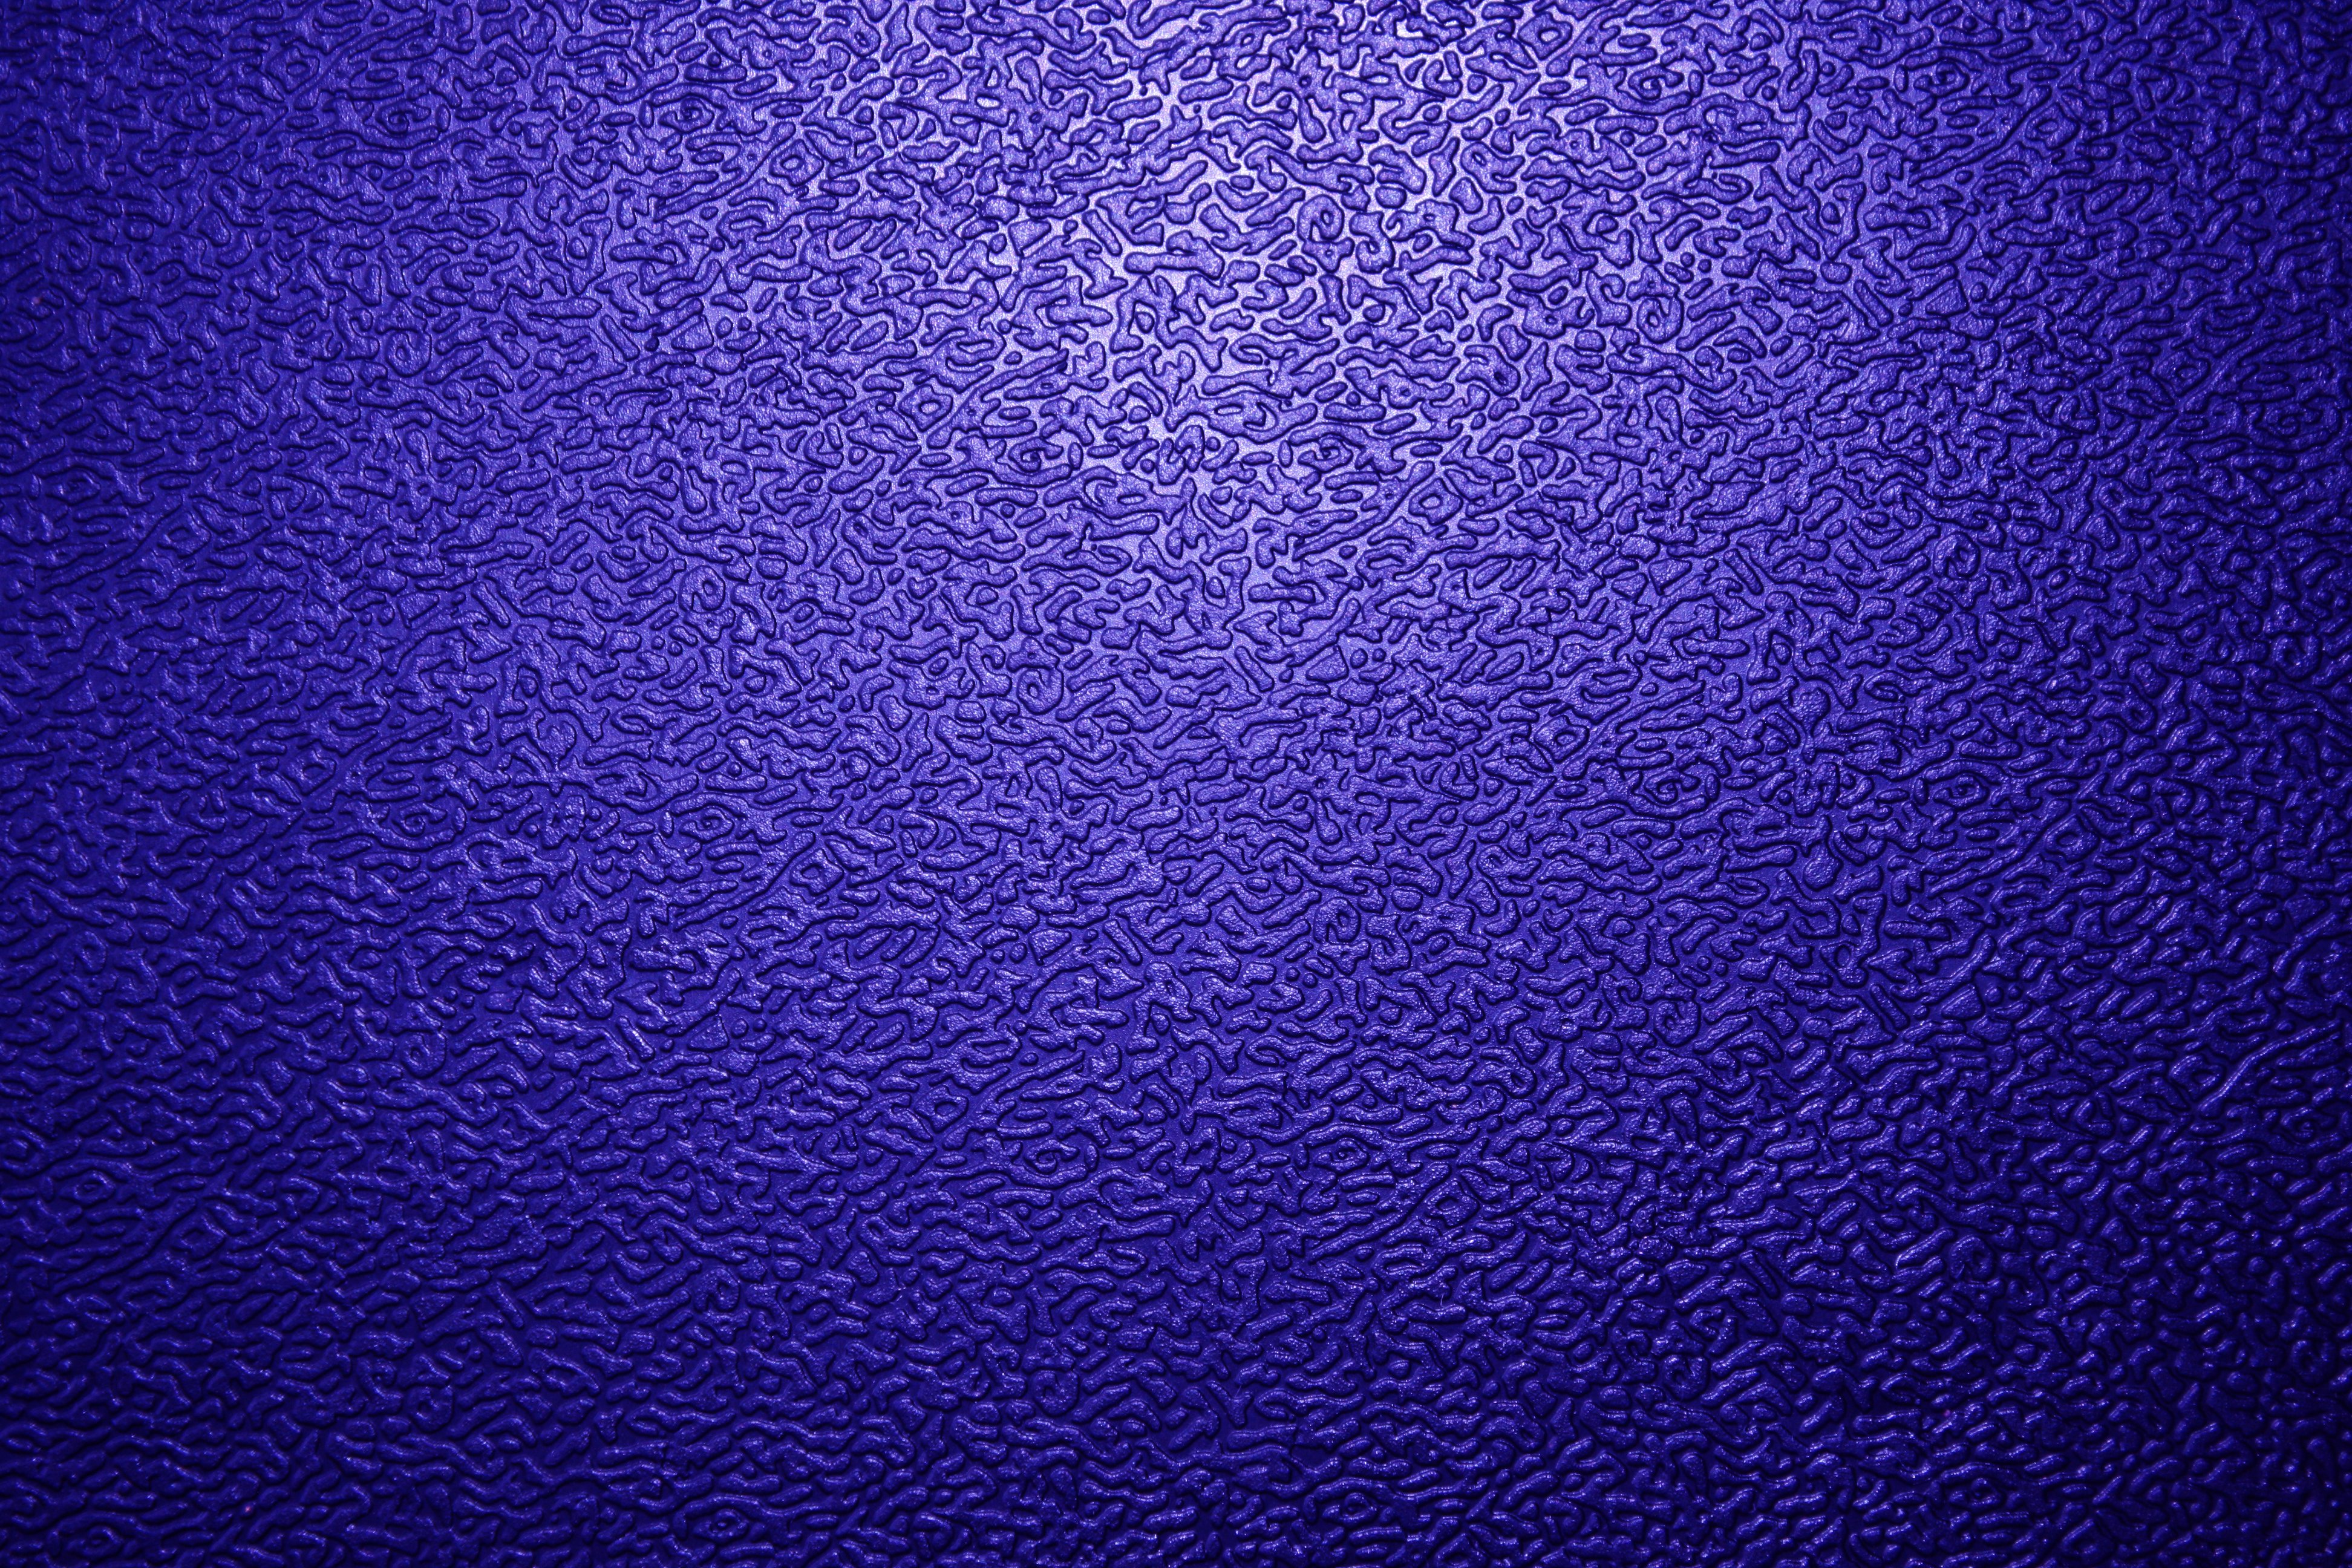 Textured Royal Blue Plastic Close Up High Resolution Photo